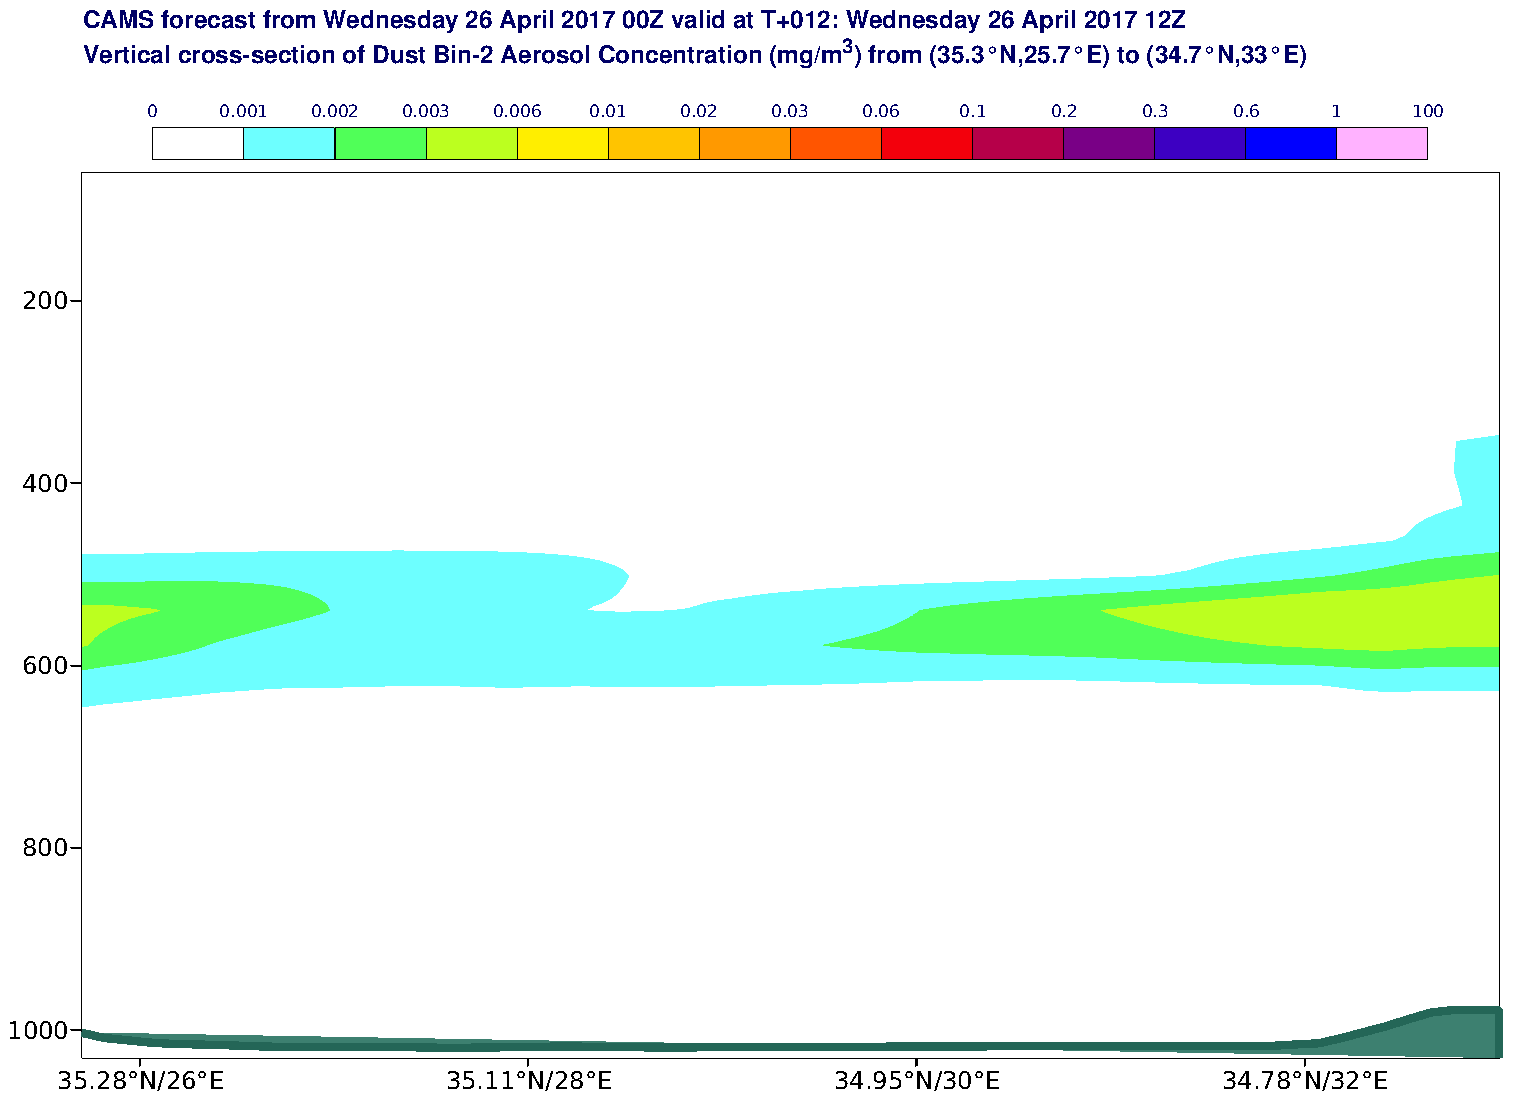 Vertical cross-section of Dust Bin-2 Aerosol Concentration (mg/m3) valid at T12 - 2017-04-26 12:00